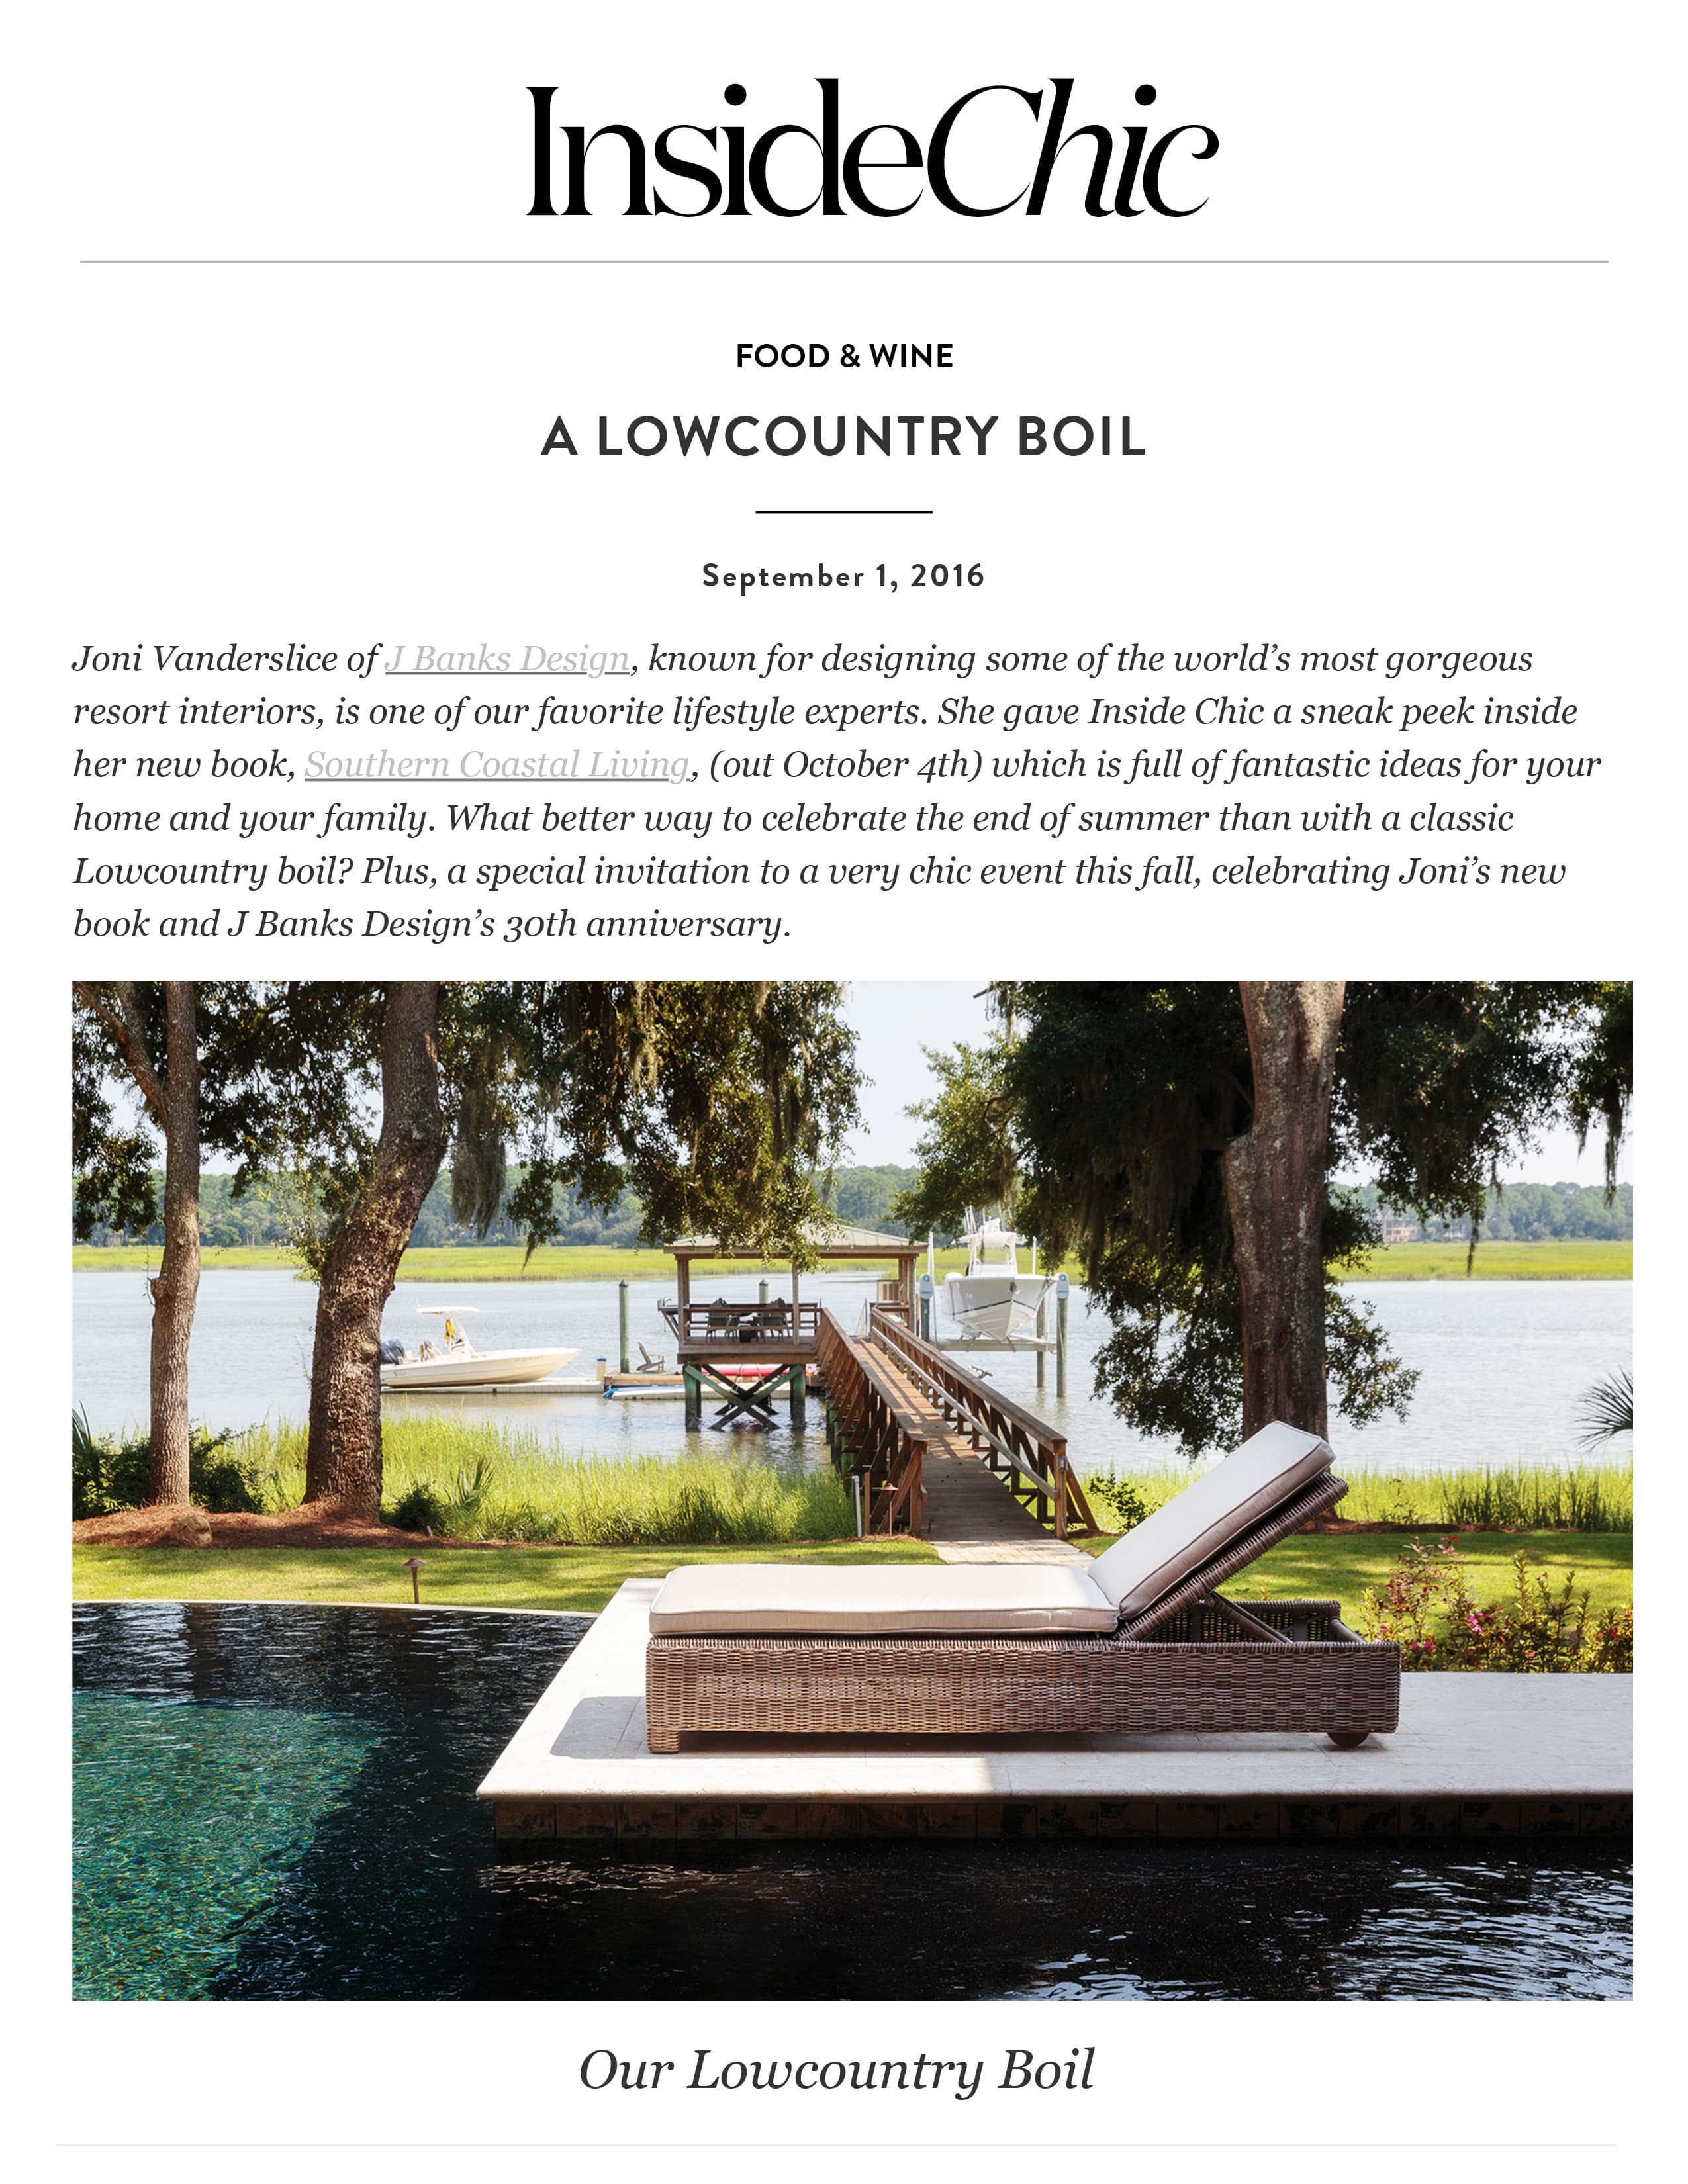 joni vanderslice featured inside chic highlighting her favorite variation of a lowcountry boil and her book